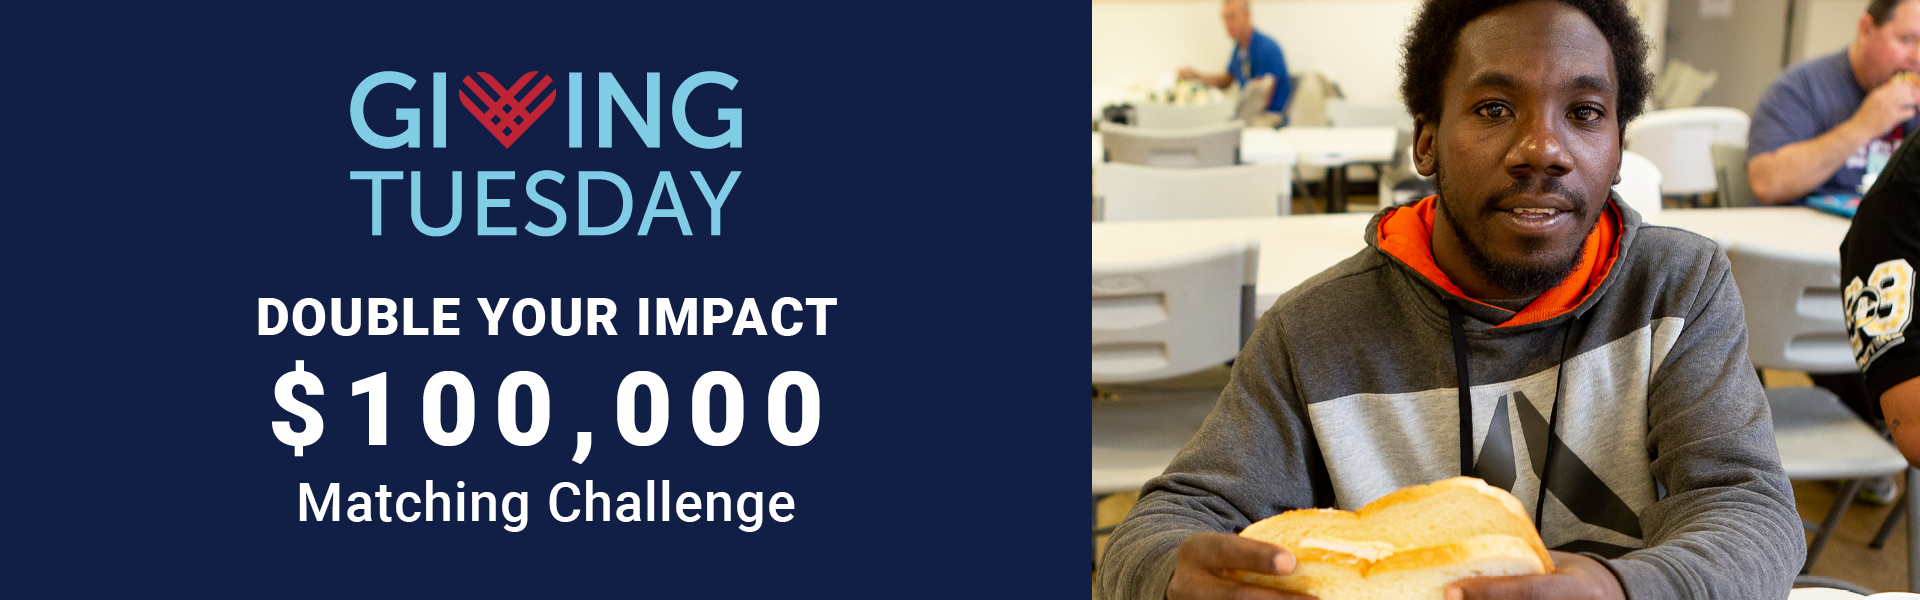 Giving Tuesday $100,000 Matching Challenge